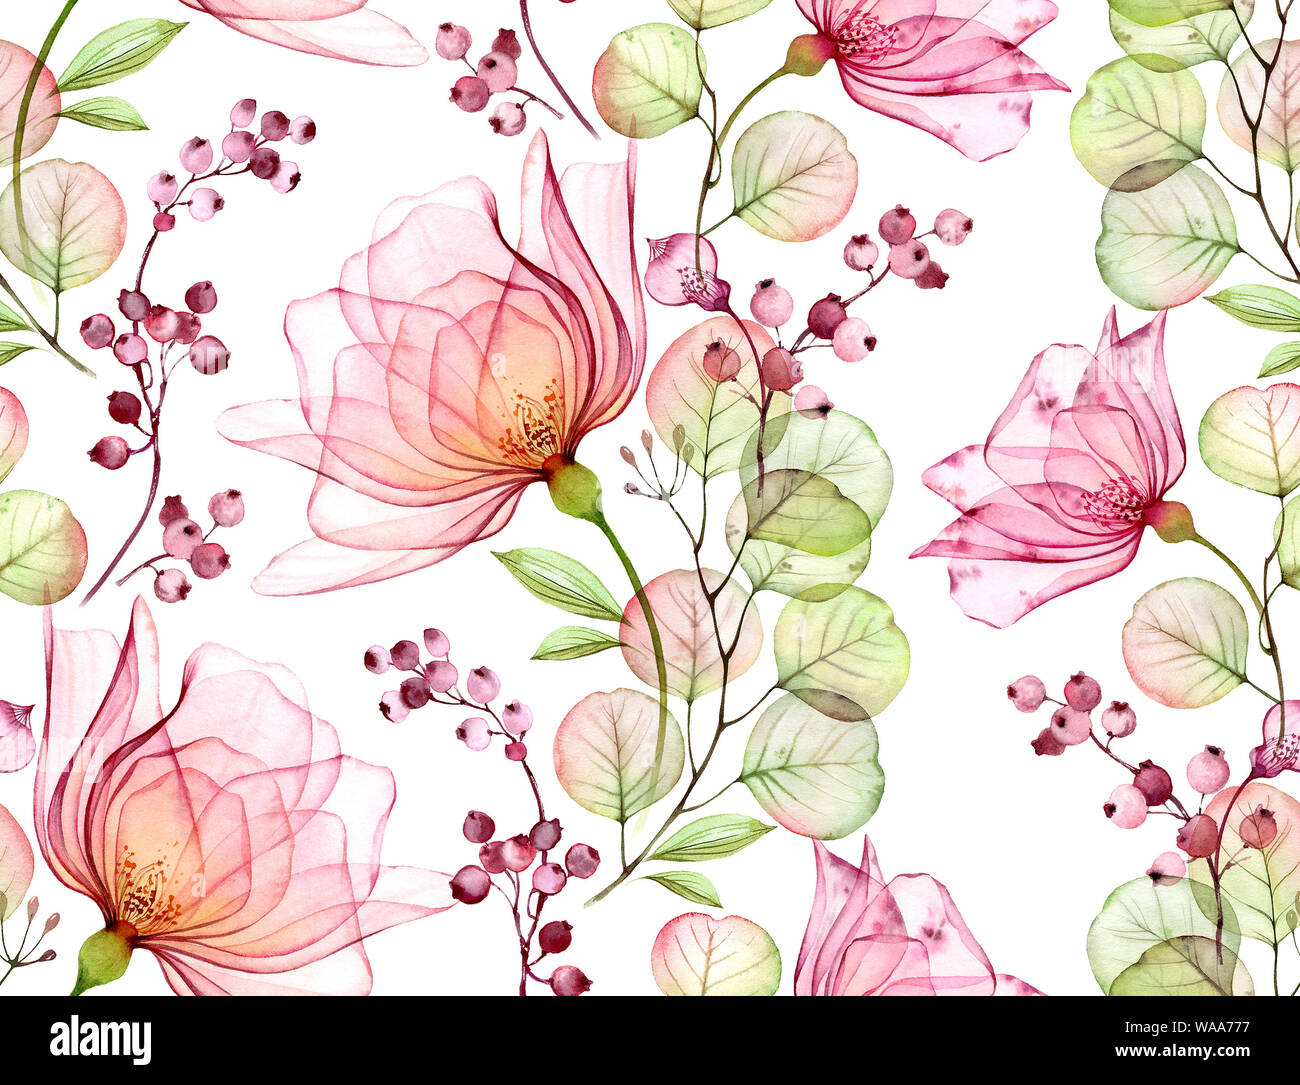 Transparent Watercolor Rose Seamless Floral Pattern Isolated Hand Drawn With Big Flowers Eucalyptus And Berries For Wallpaper Design Textile Stock Photo Alamy